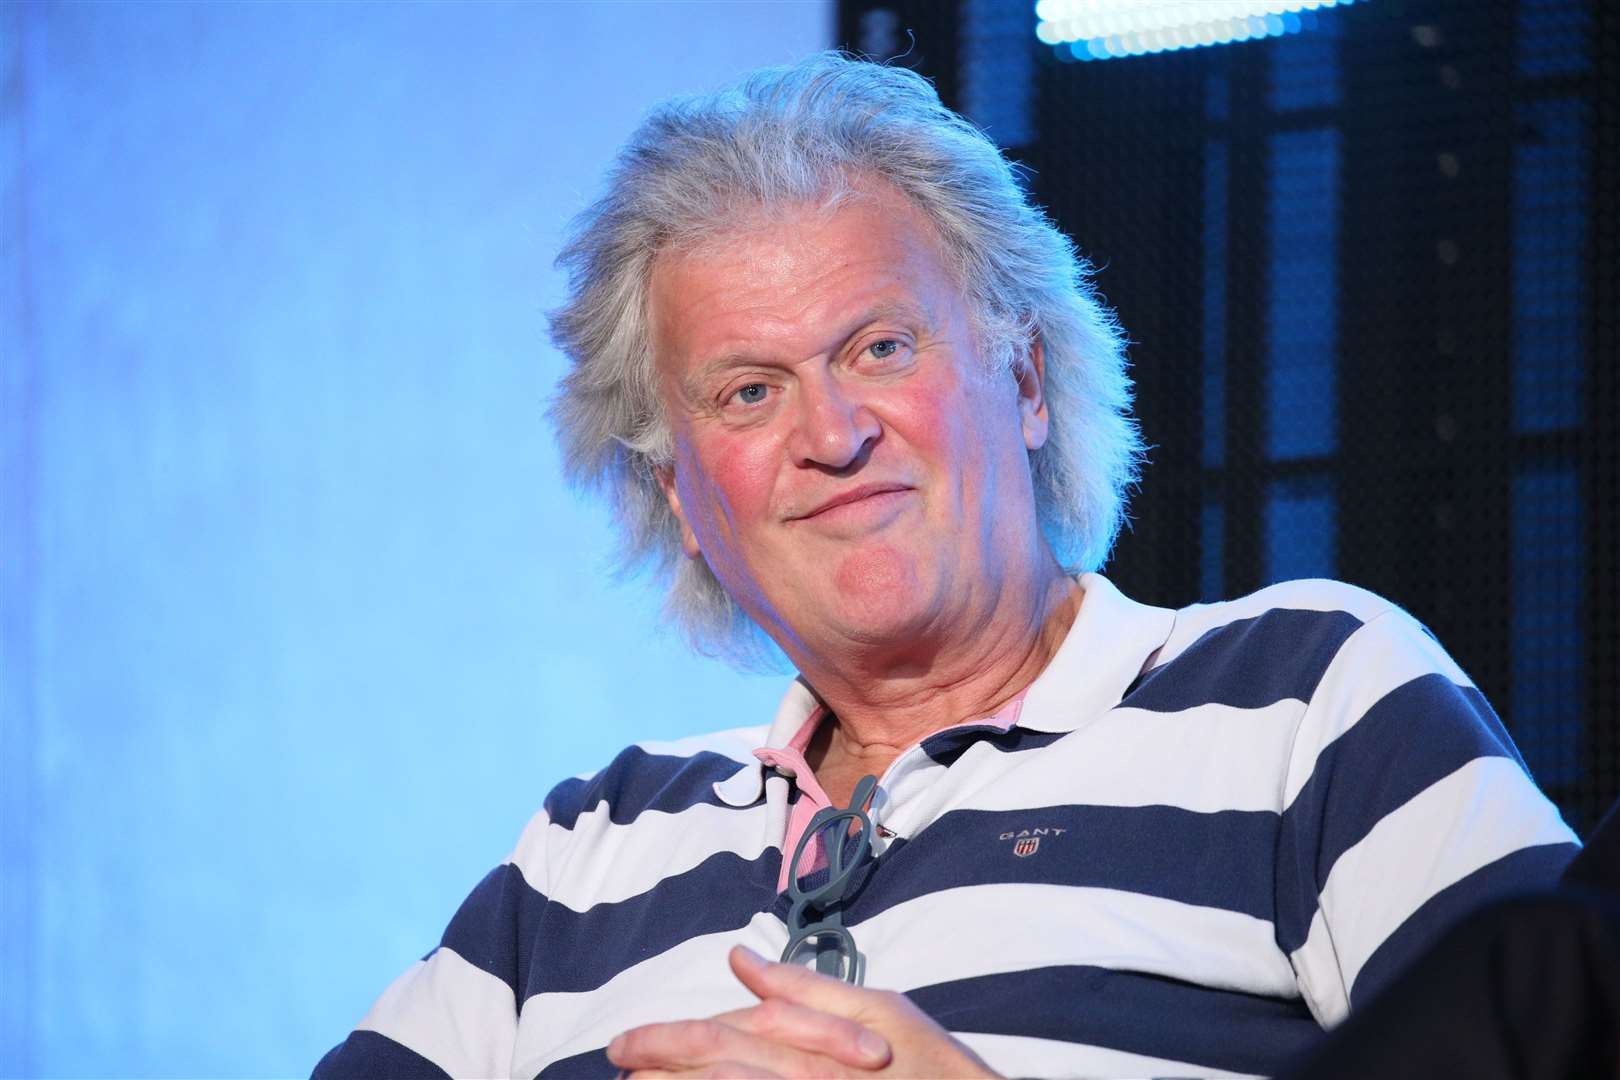 JD Wetherspoon chairman Tim Martin said Mr Hunt needs to cut VAT to support pubs and consumer spending (Jonathan Brady/PA)